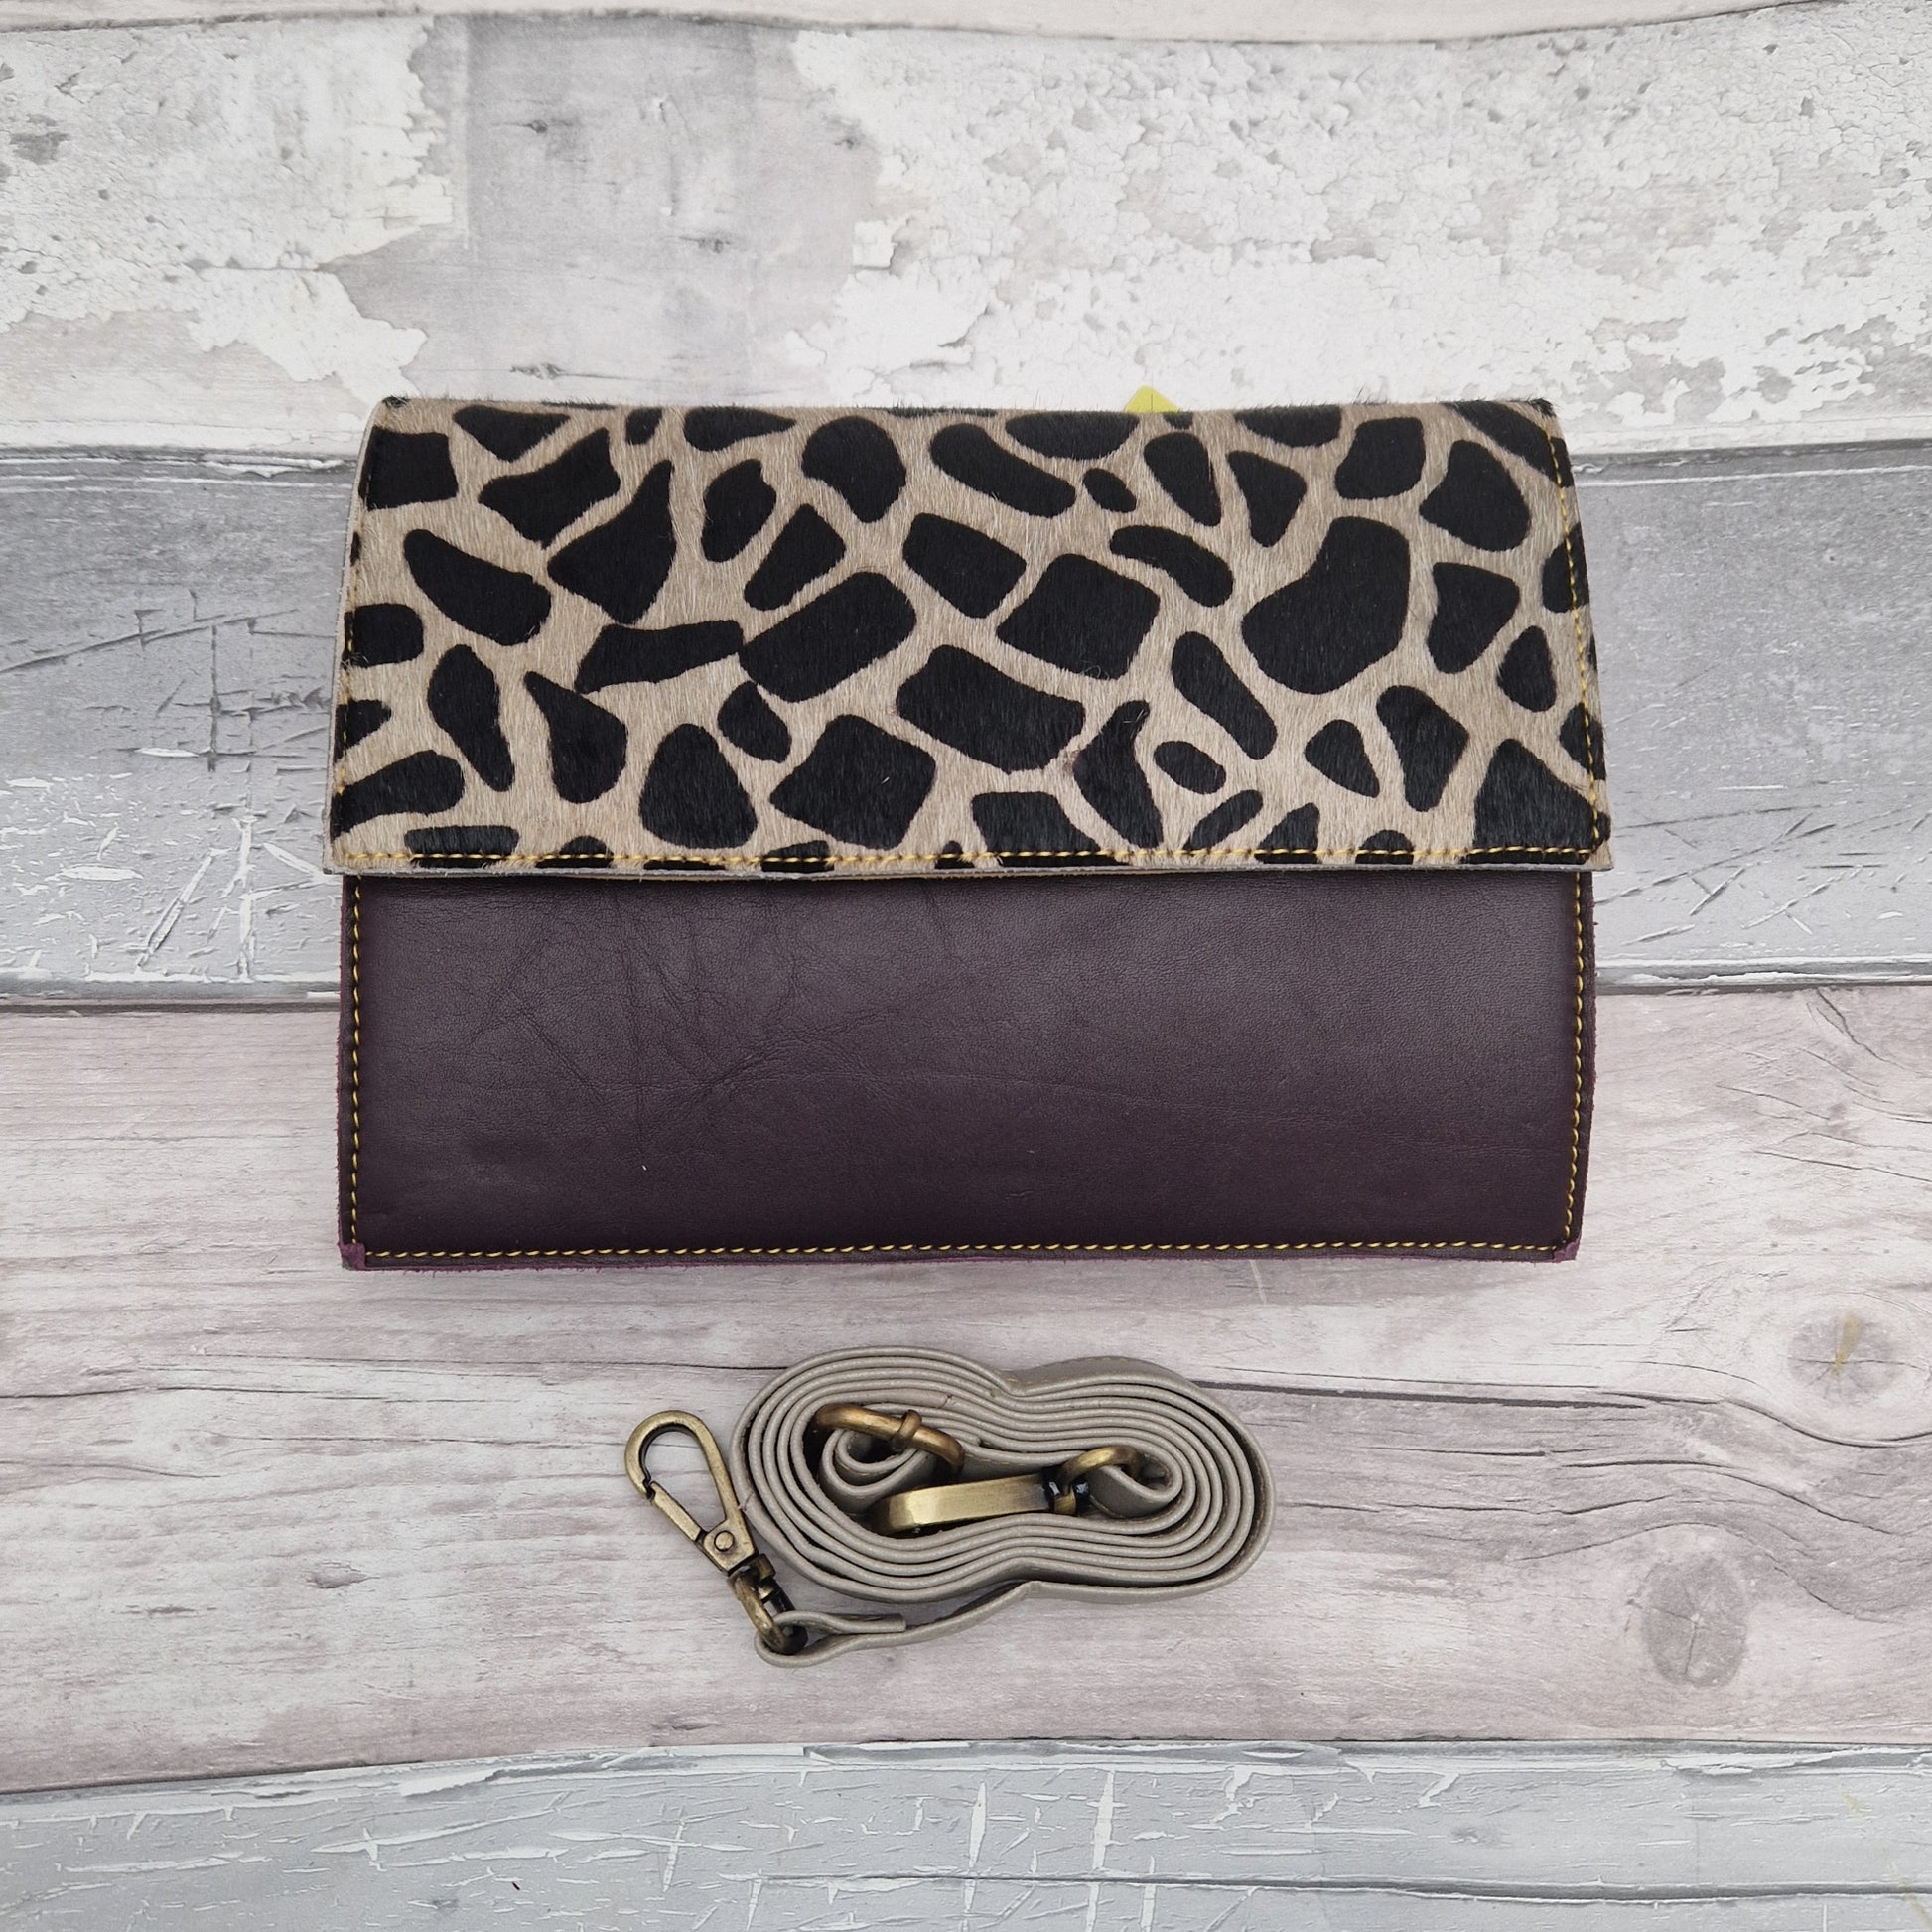 Burgundy leather bag with a textured panel of Giraffe Print.